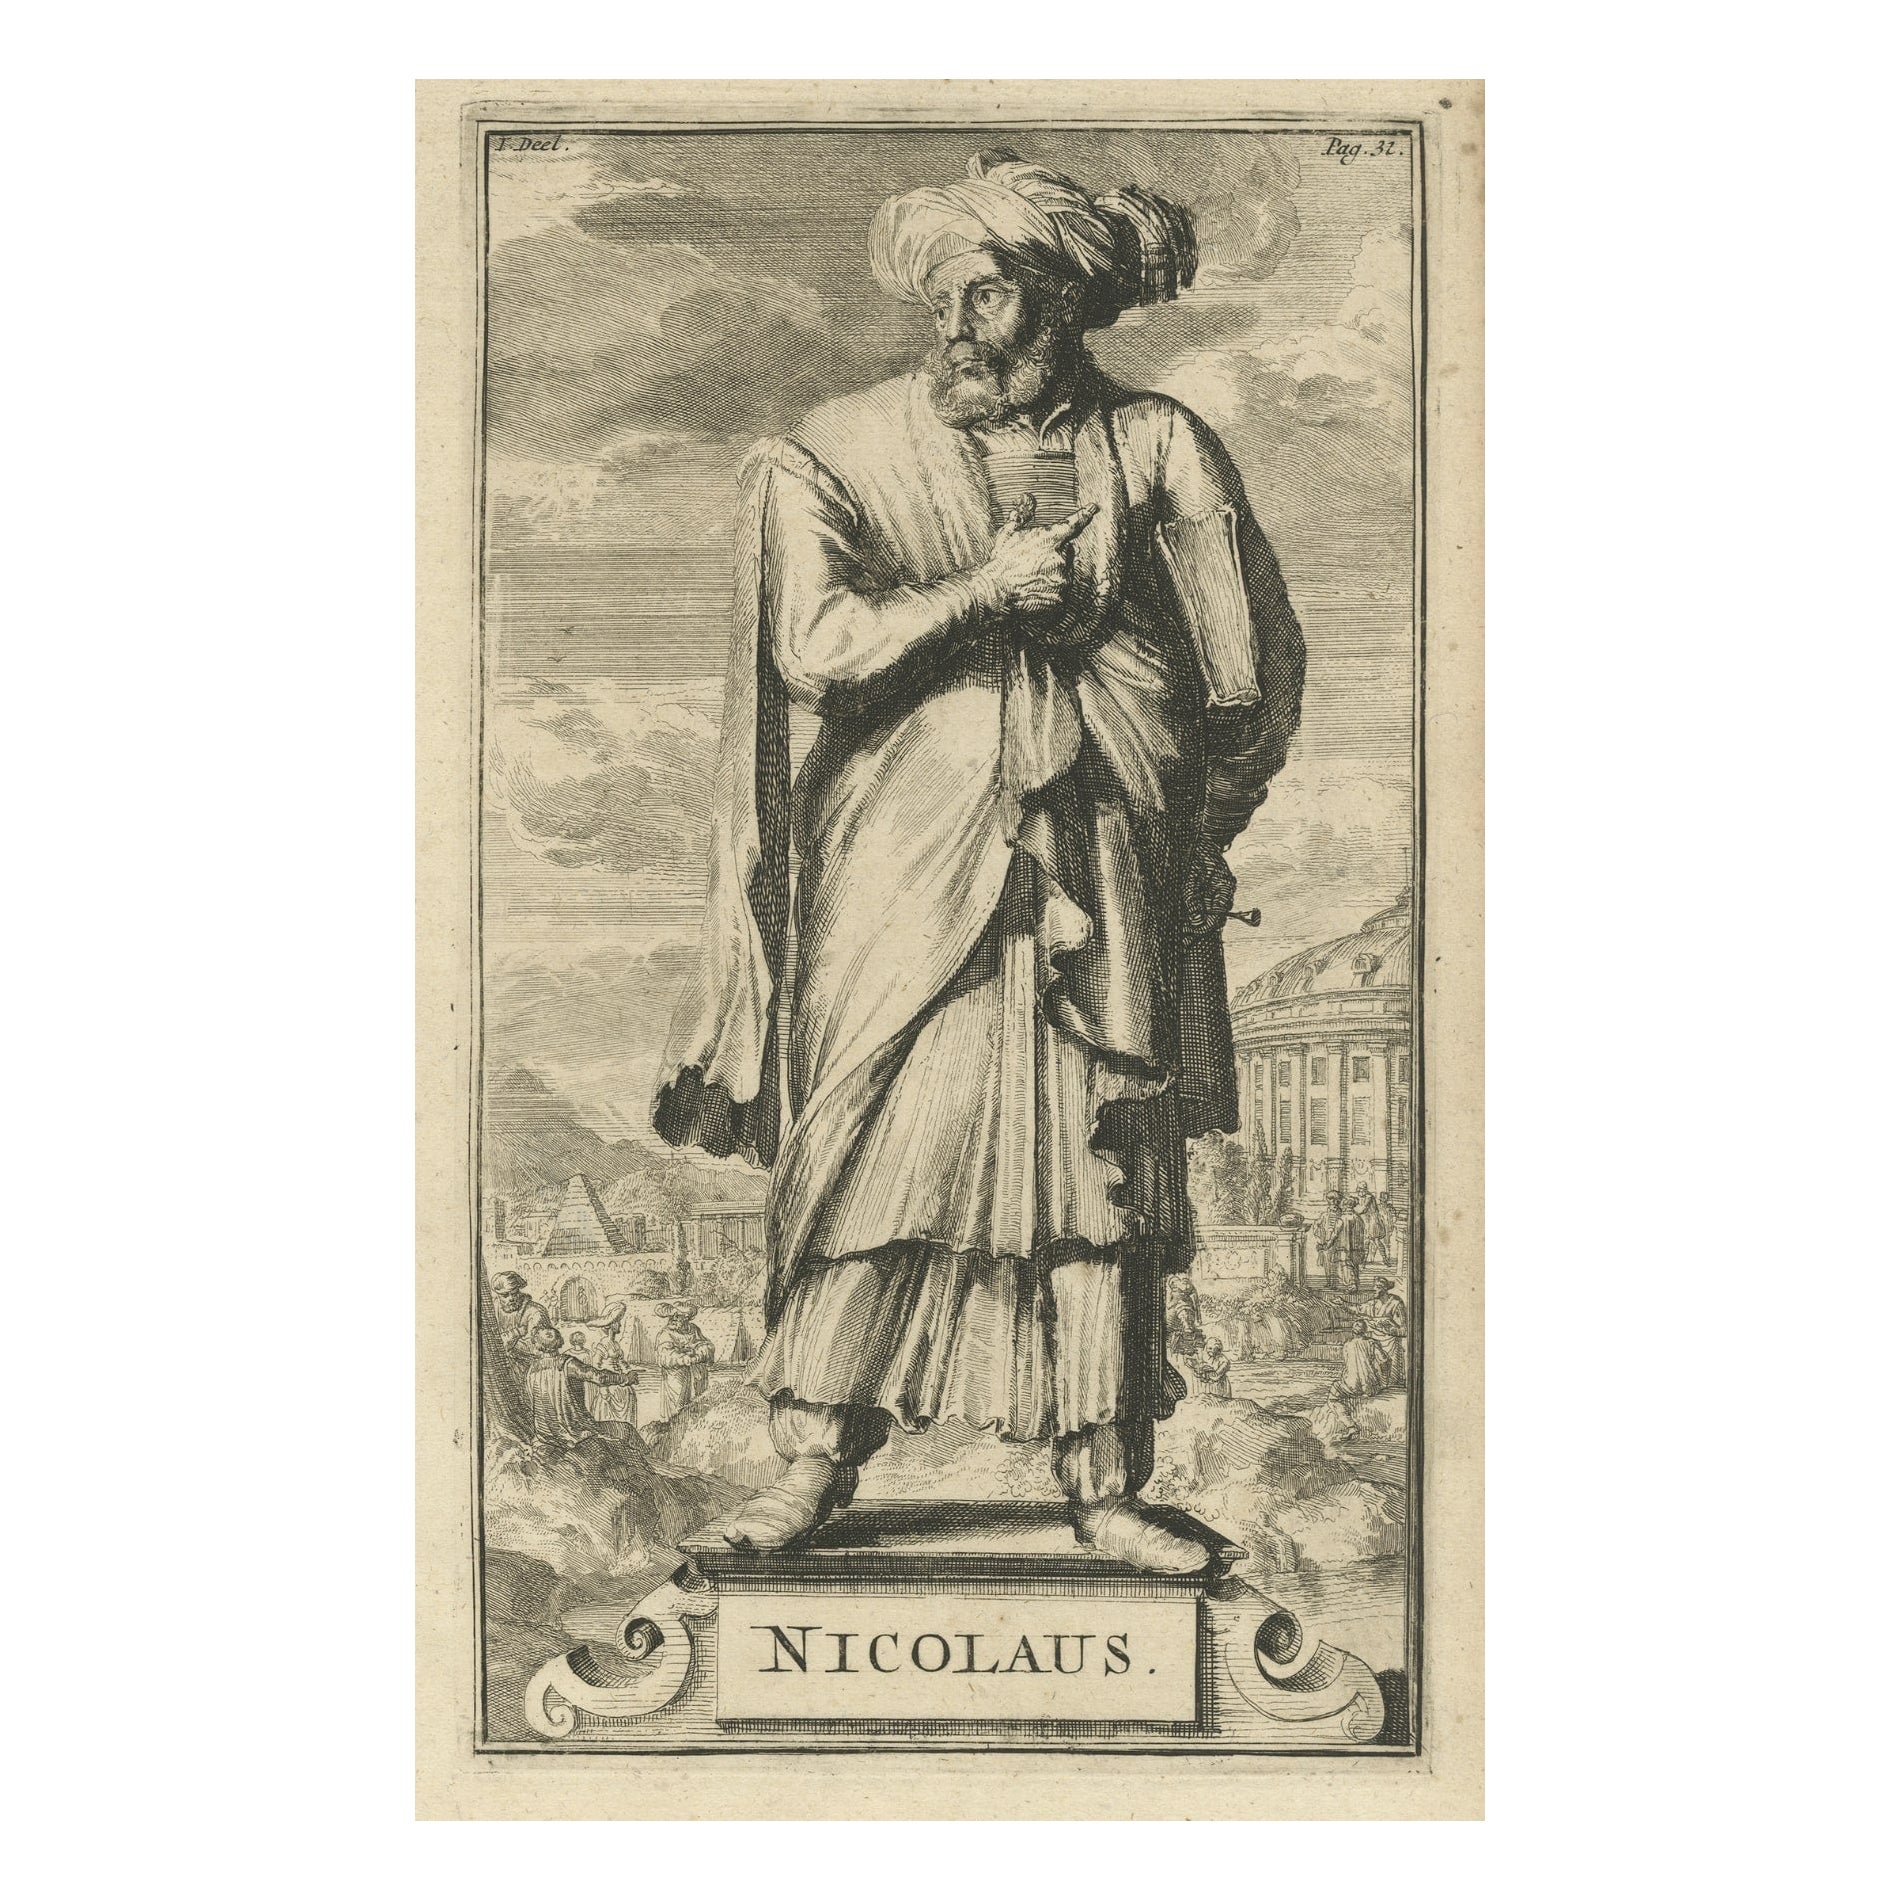 Antique Print of Nicolaus, Christian Heresy, Published Ca. 1701